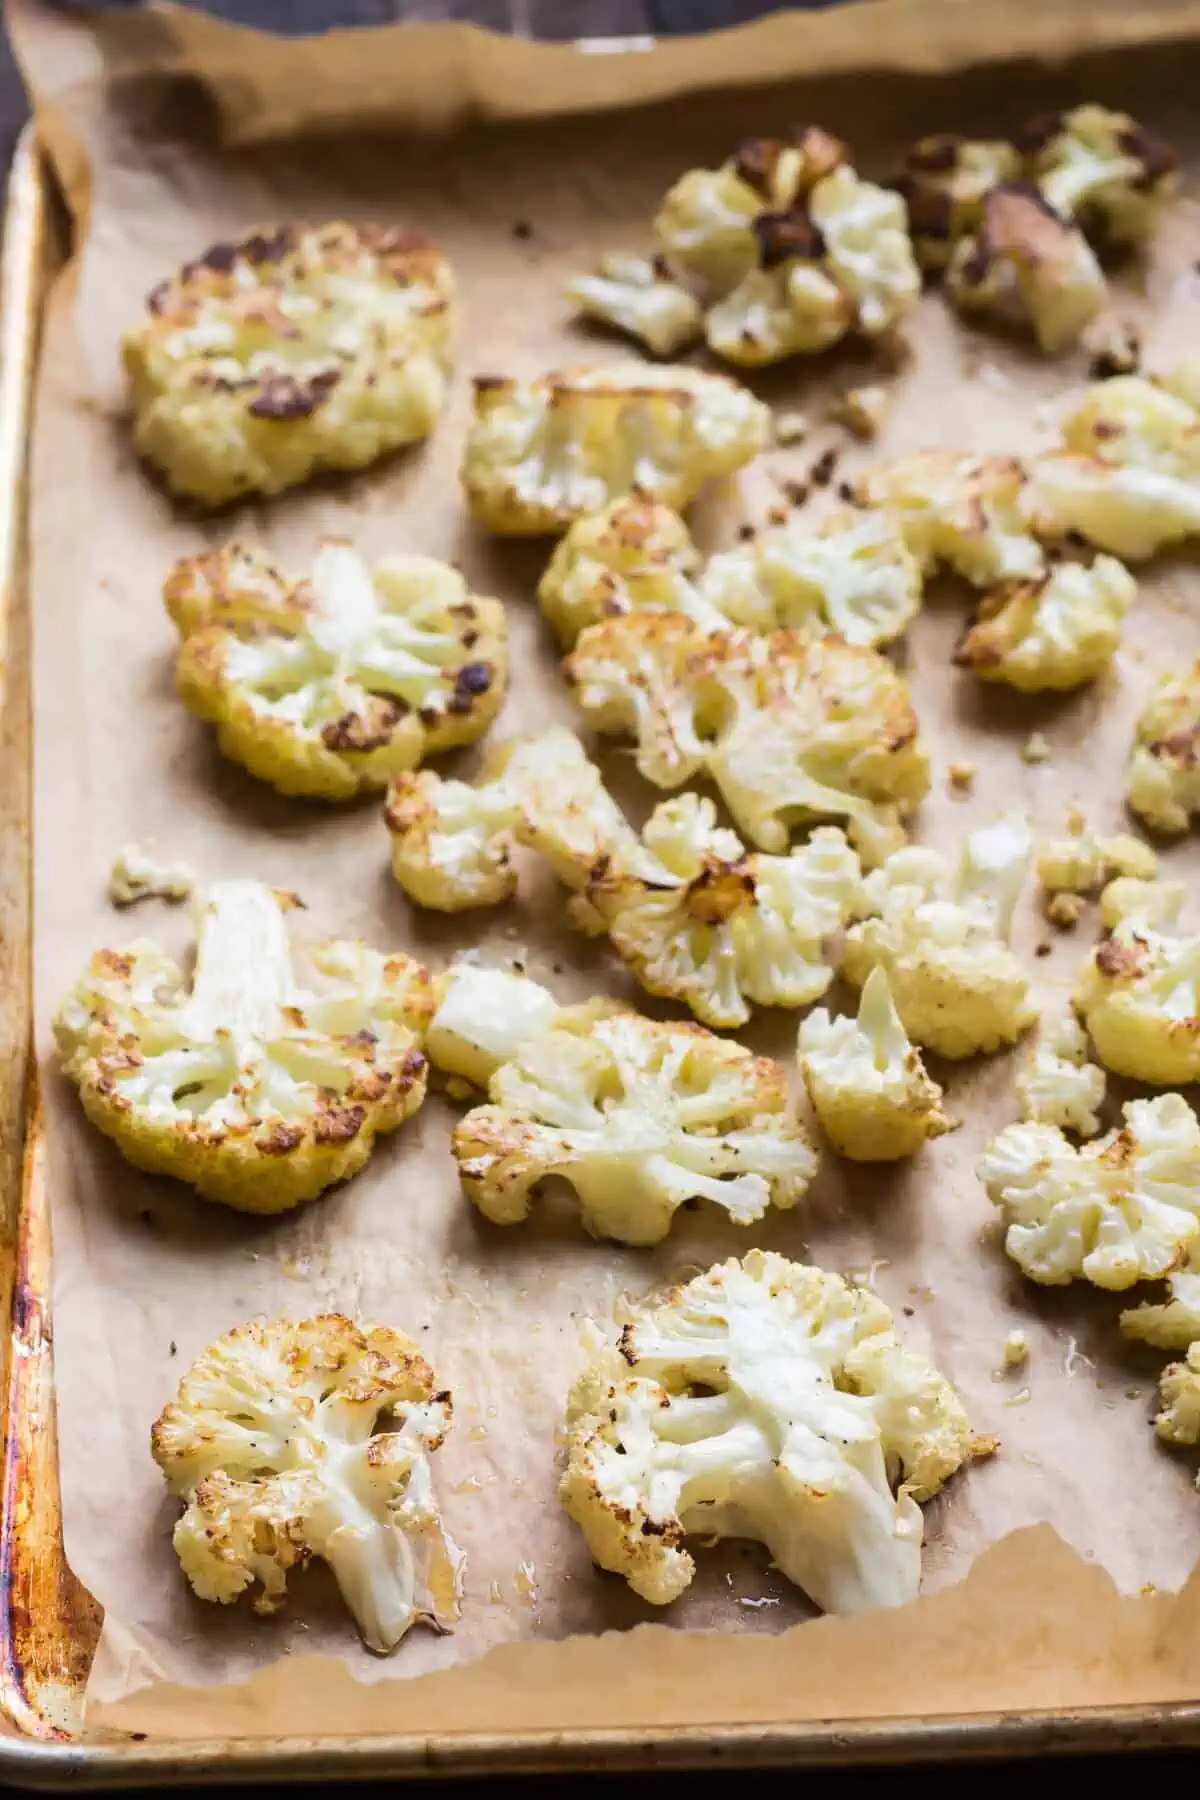 Roasted cauliflower florets on a parchment lined baking sheet.